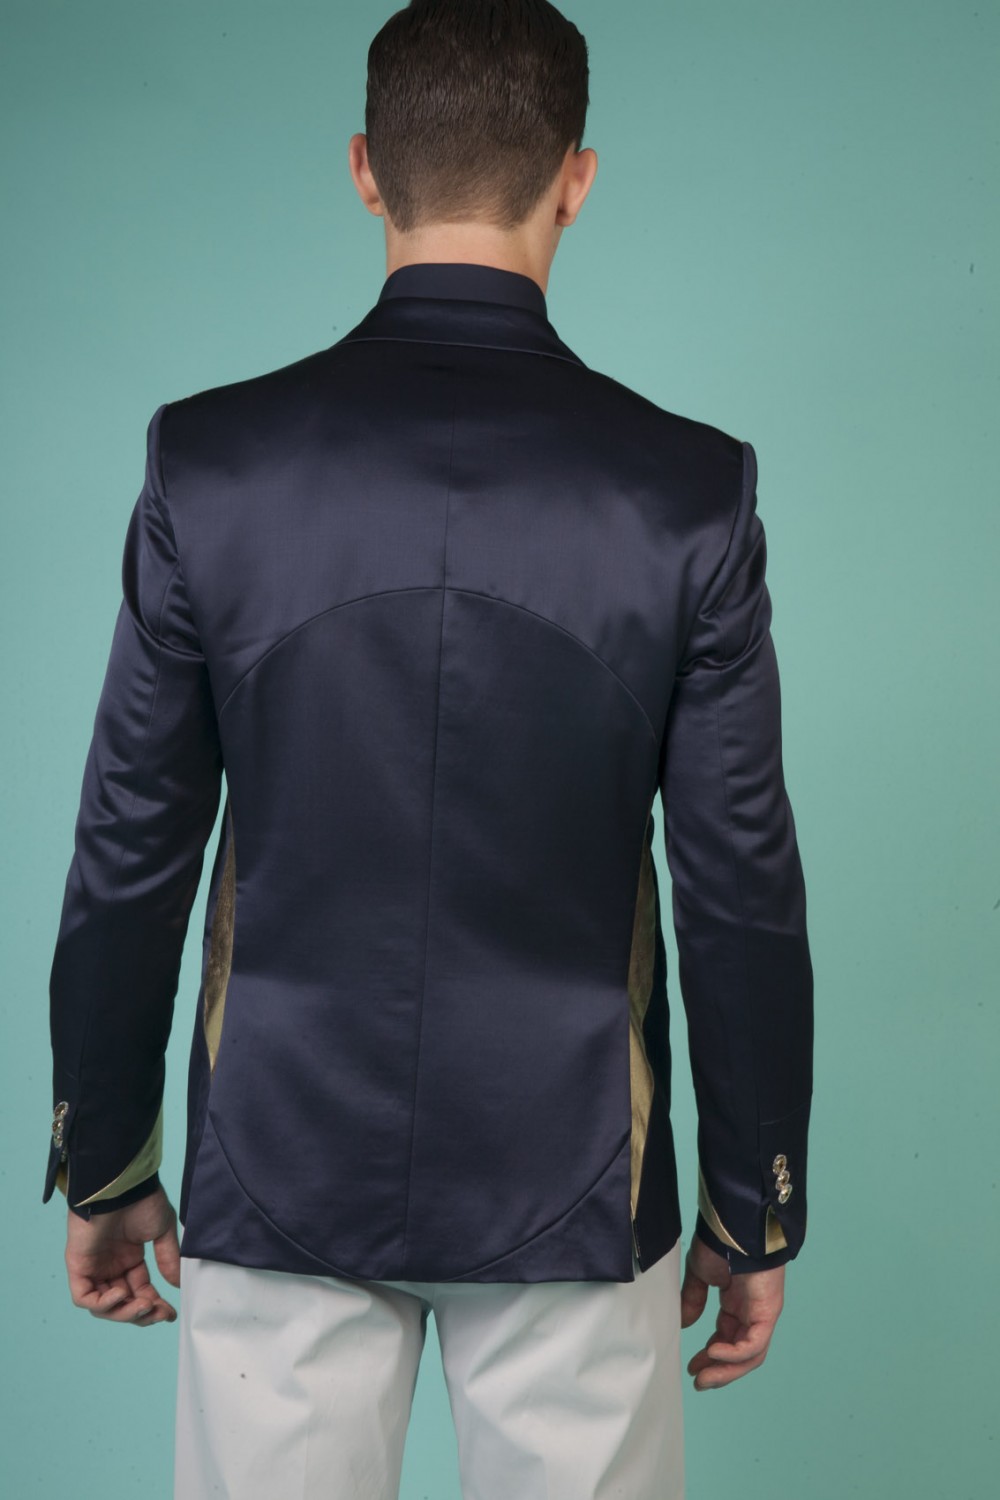 Colour: Navy blue - Gold
Fabric: Coated wool - Stretch cotton
Lining: Viscose